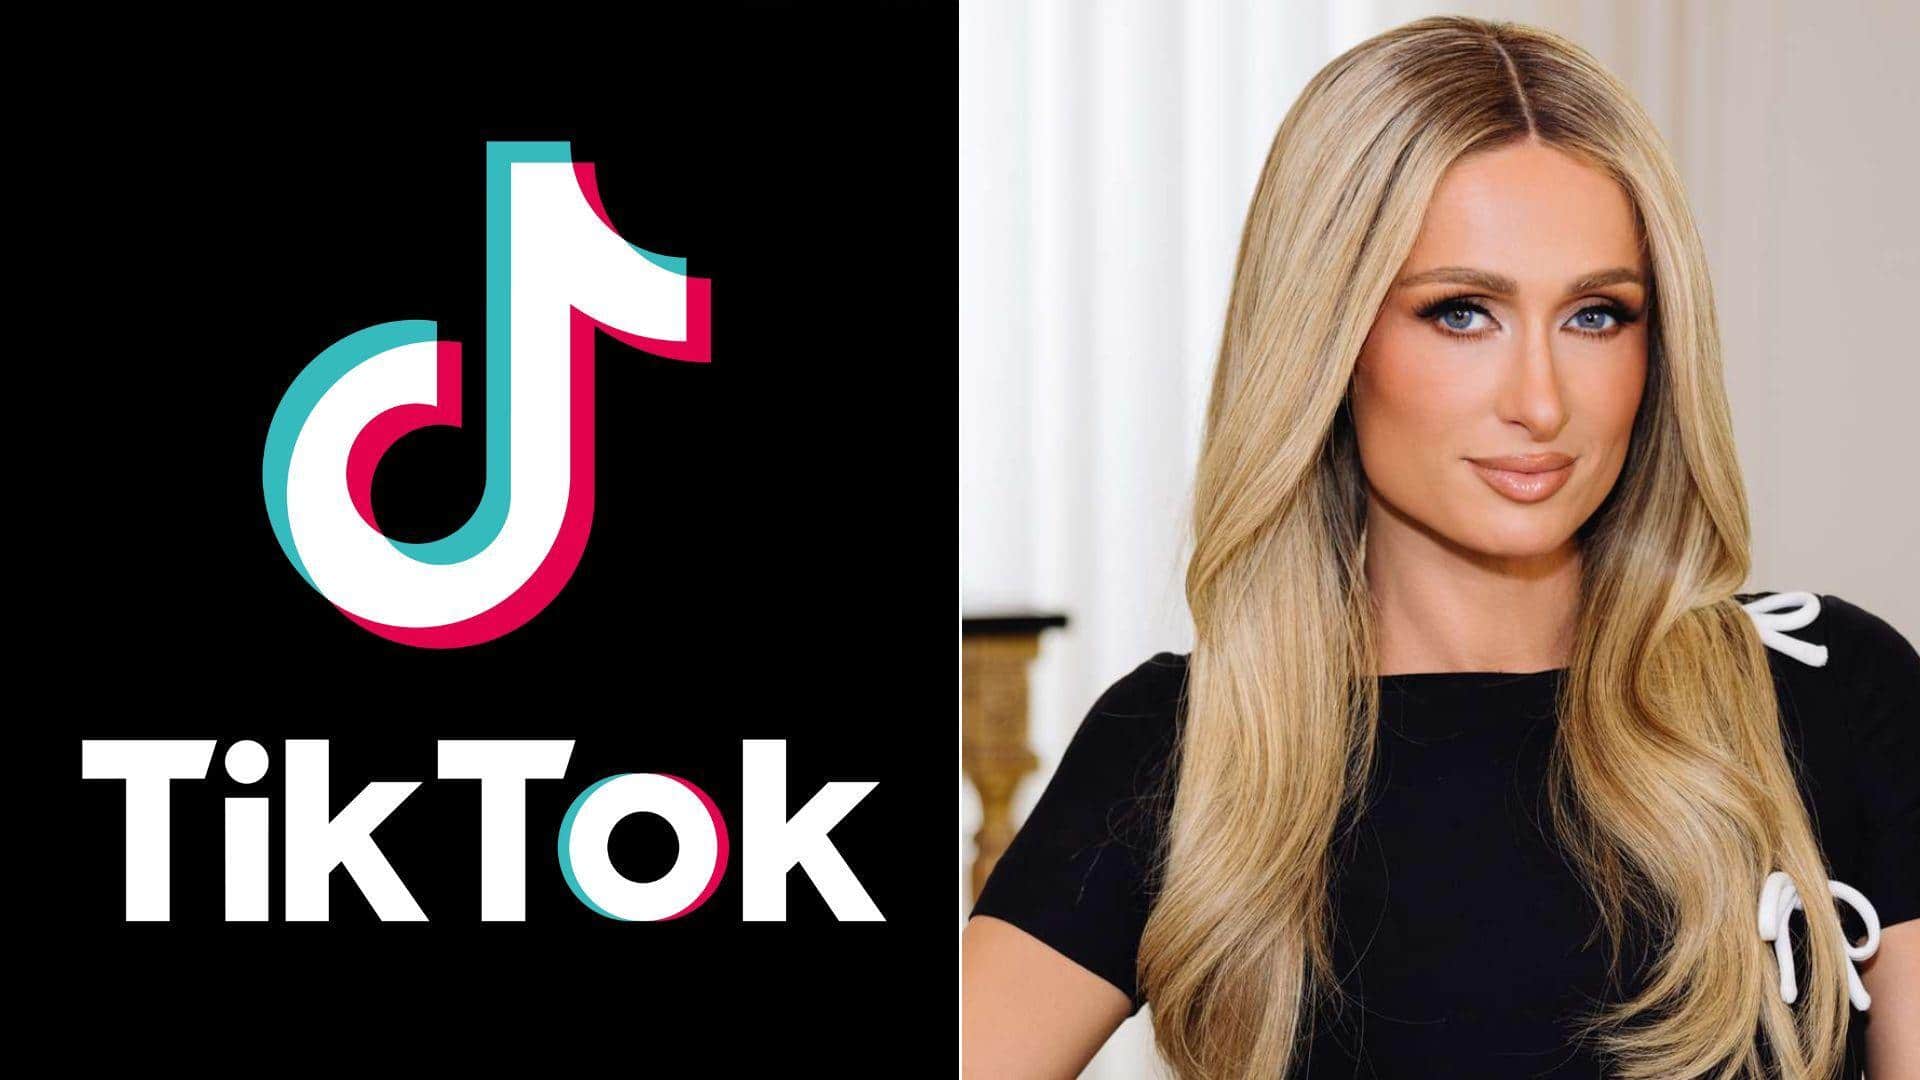 Paris Hilton among several high-profile TikTok accounts targeted in cyber-attack